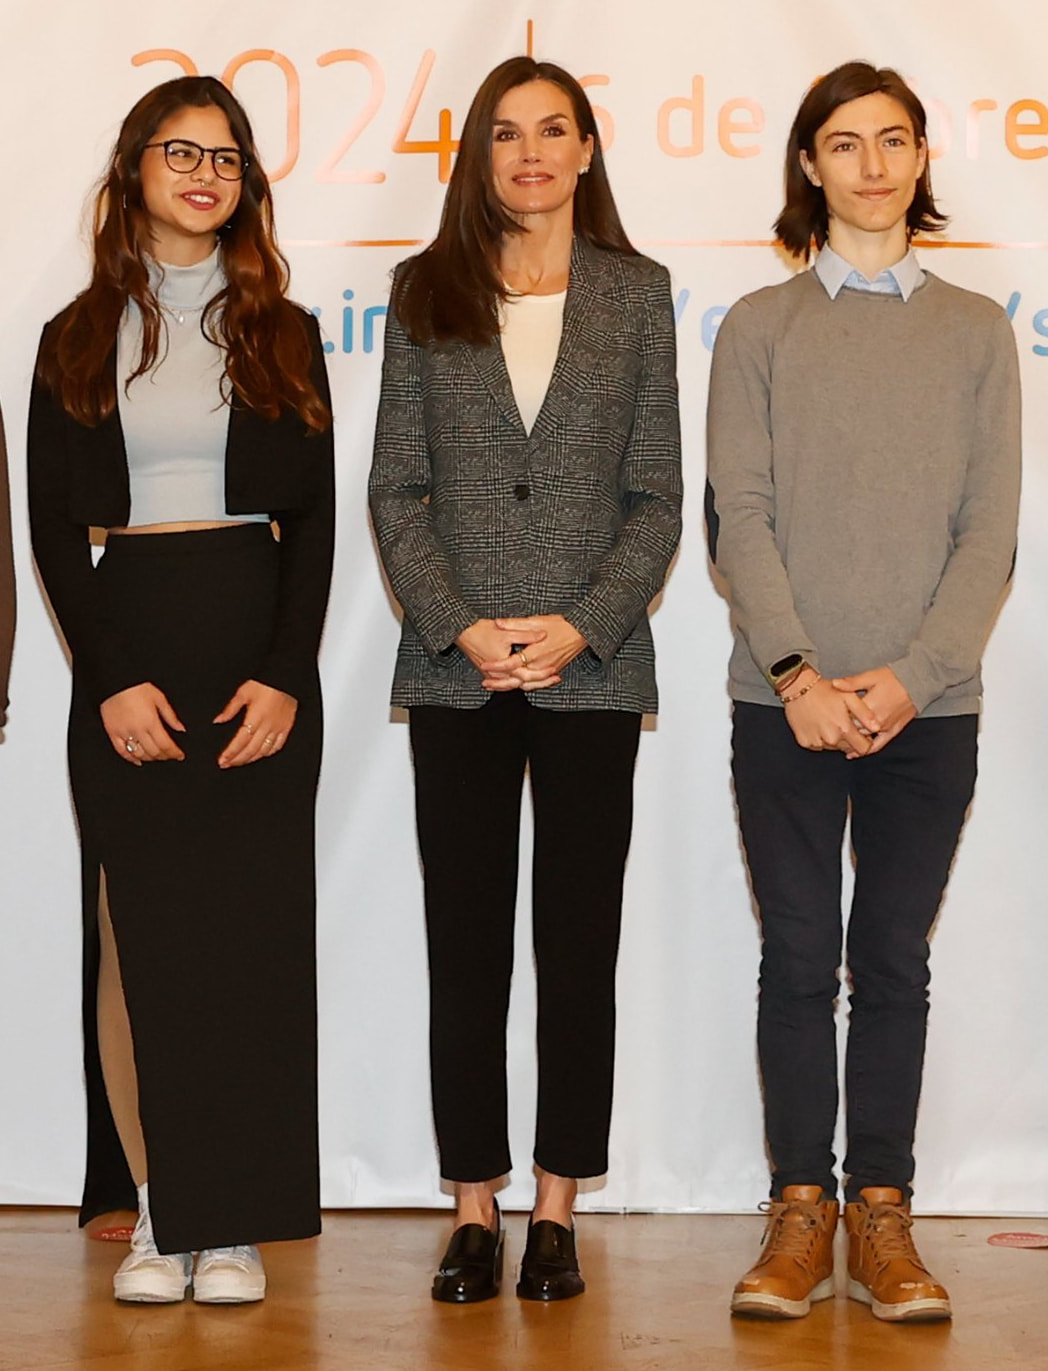 Queen Letizia of Spain attended the opening ceremony of “Safer Internet Day 2024” at the Casino de Madrid on 6 February 2024